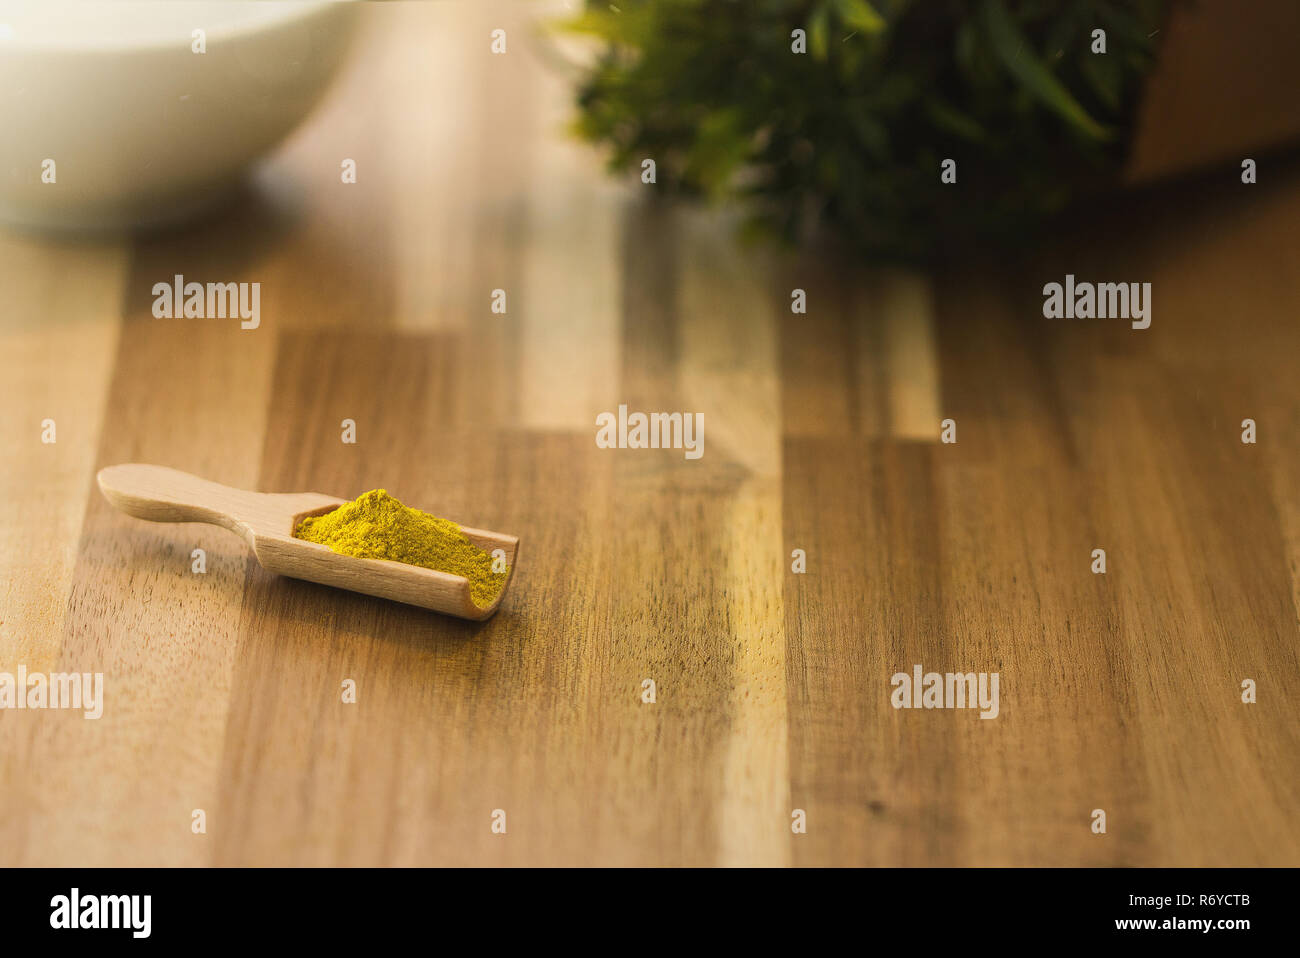 Curry spice powder and herbs on a wooden spoon. Ingredients for cooking and seasoning. Stock Photo